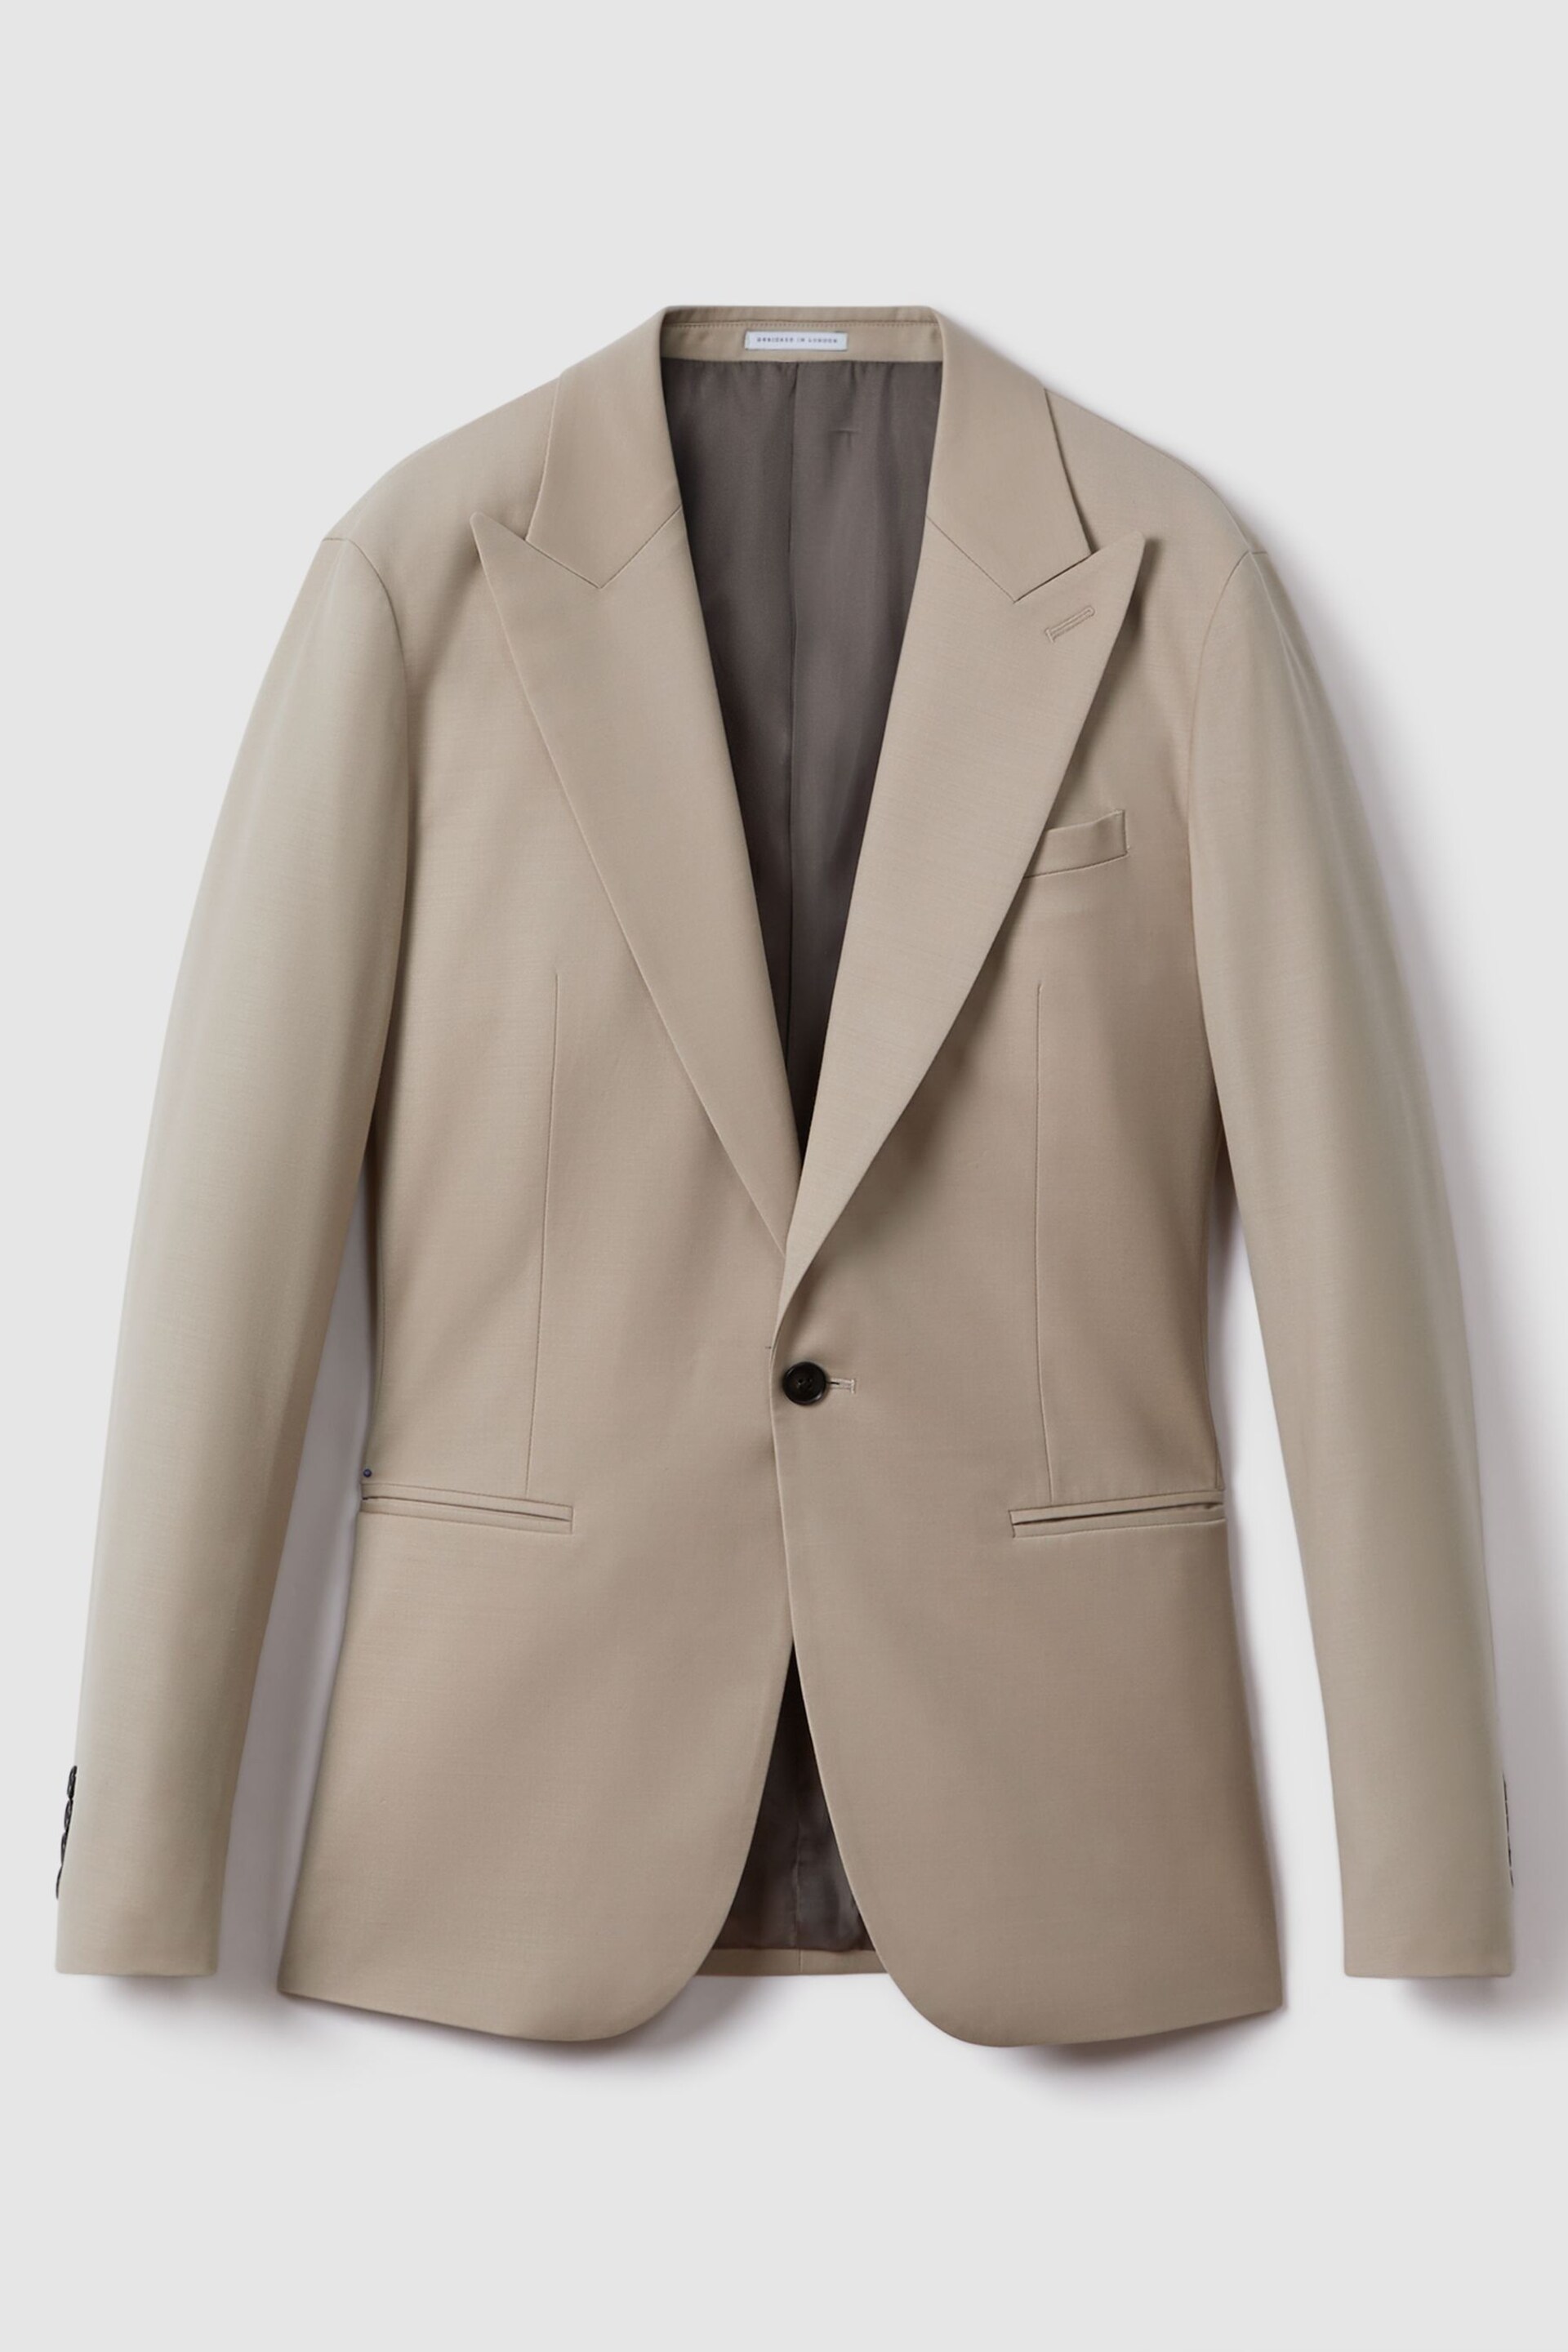 Reiss Stone Dillon Slim Fit Wool Blend Single Breasted Blazer - Image 2 of 7